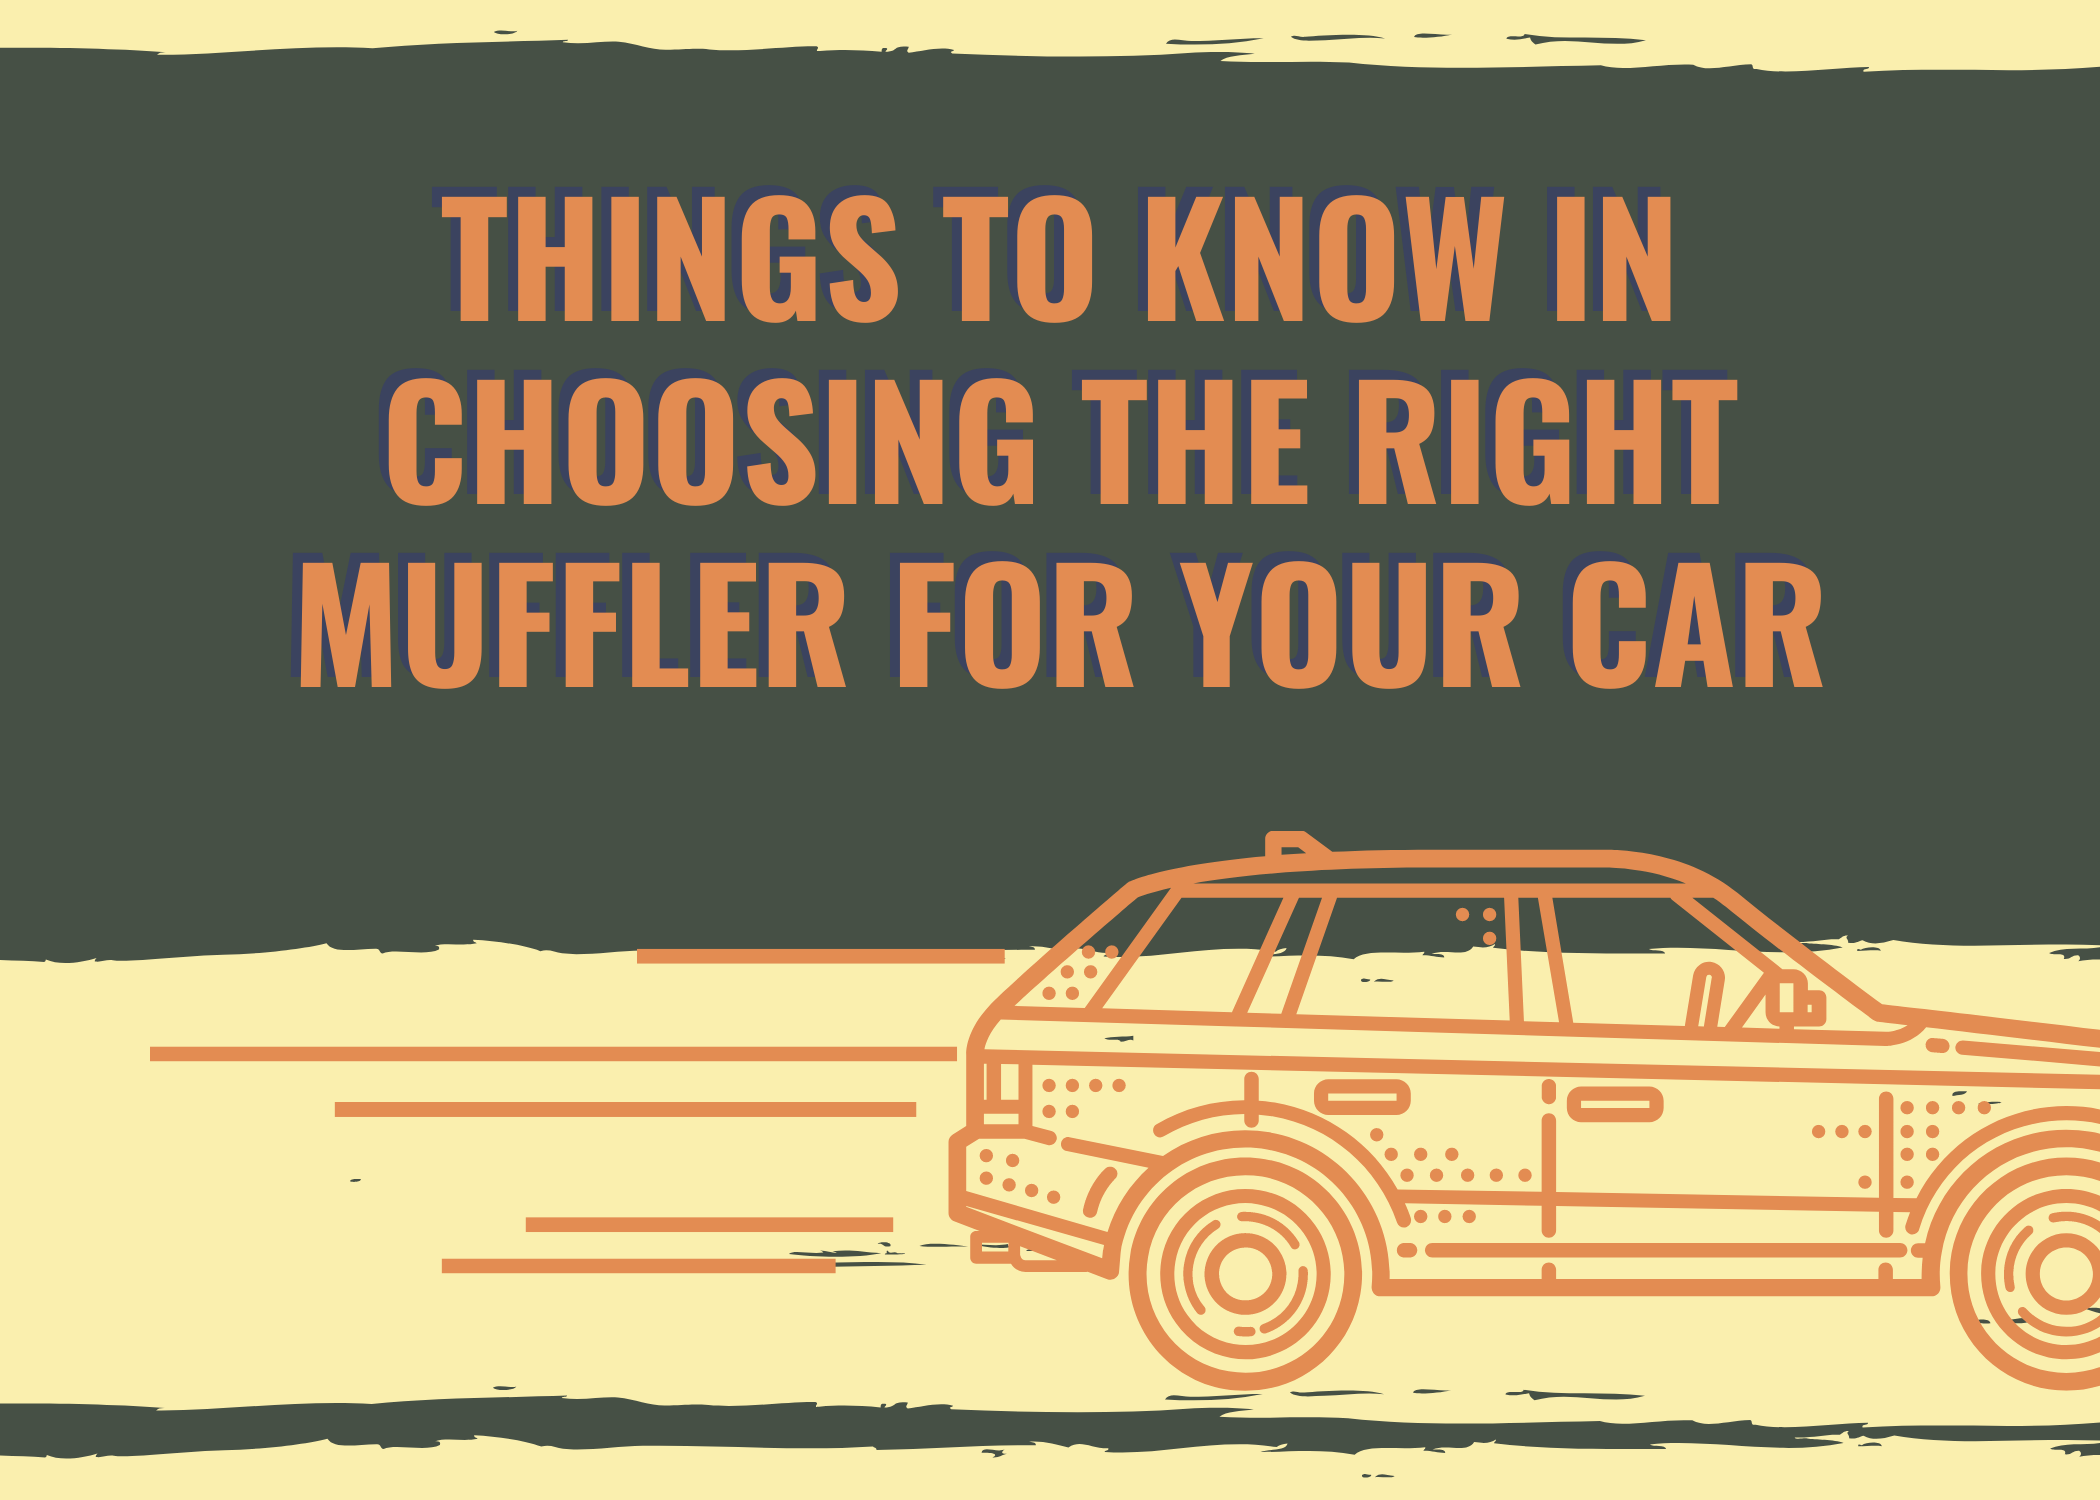 Things To Know In Choosing The Right Muffler For Your Car